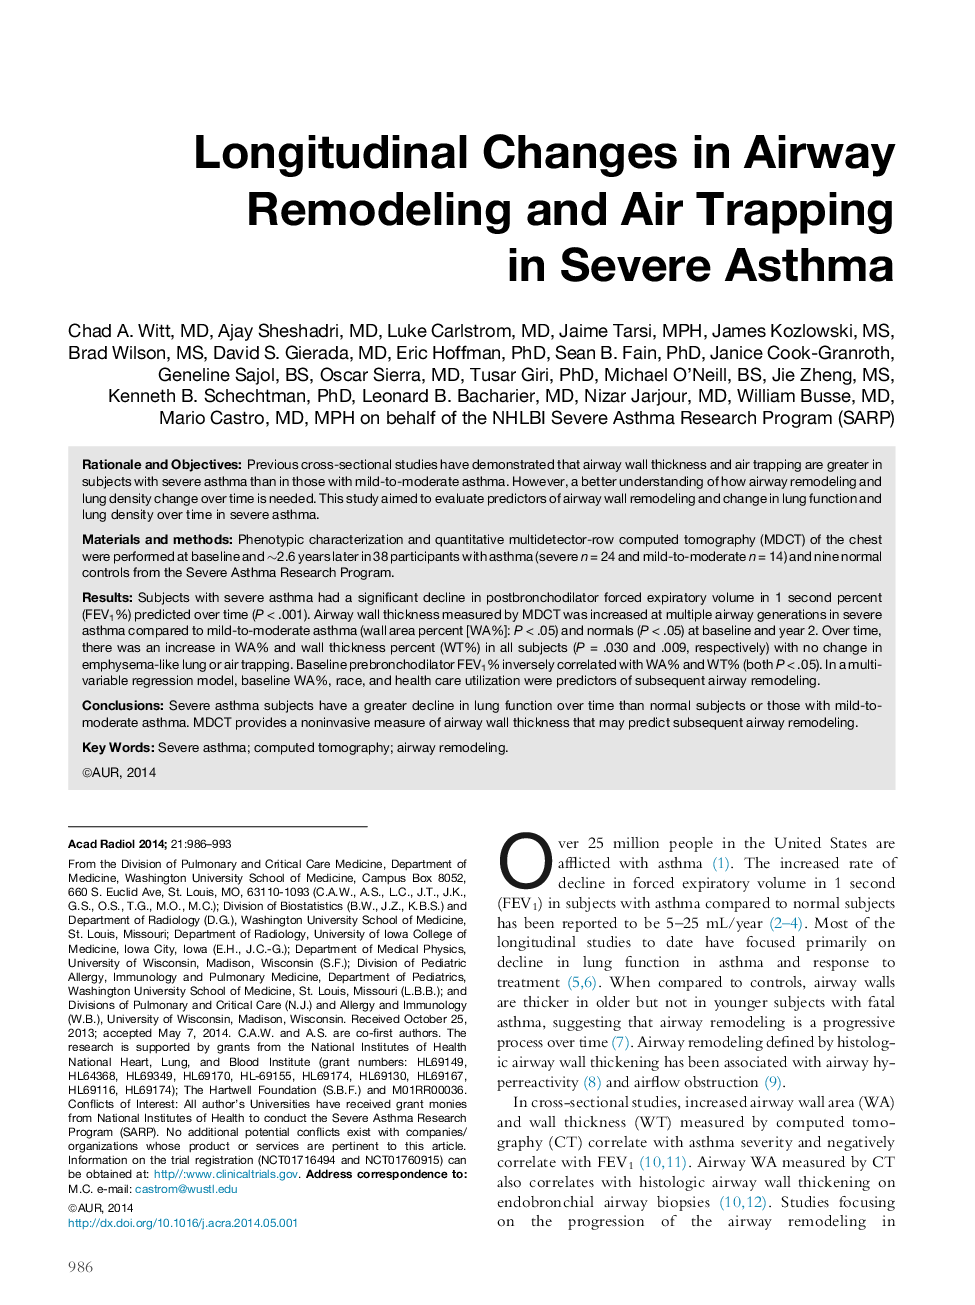 Longitudinal Changes in Airway Remodeling and Air Trapping in Severe Asthma